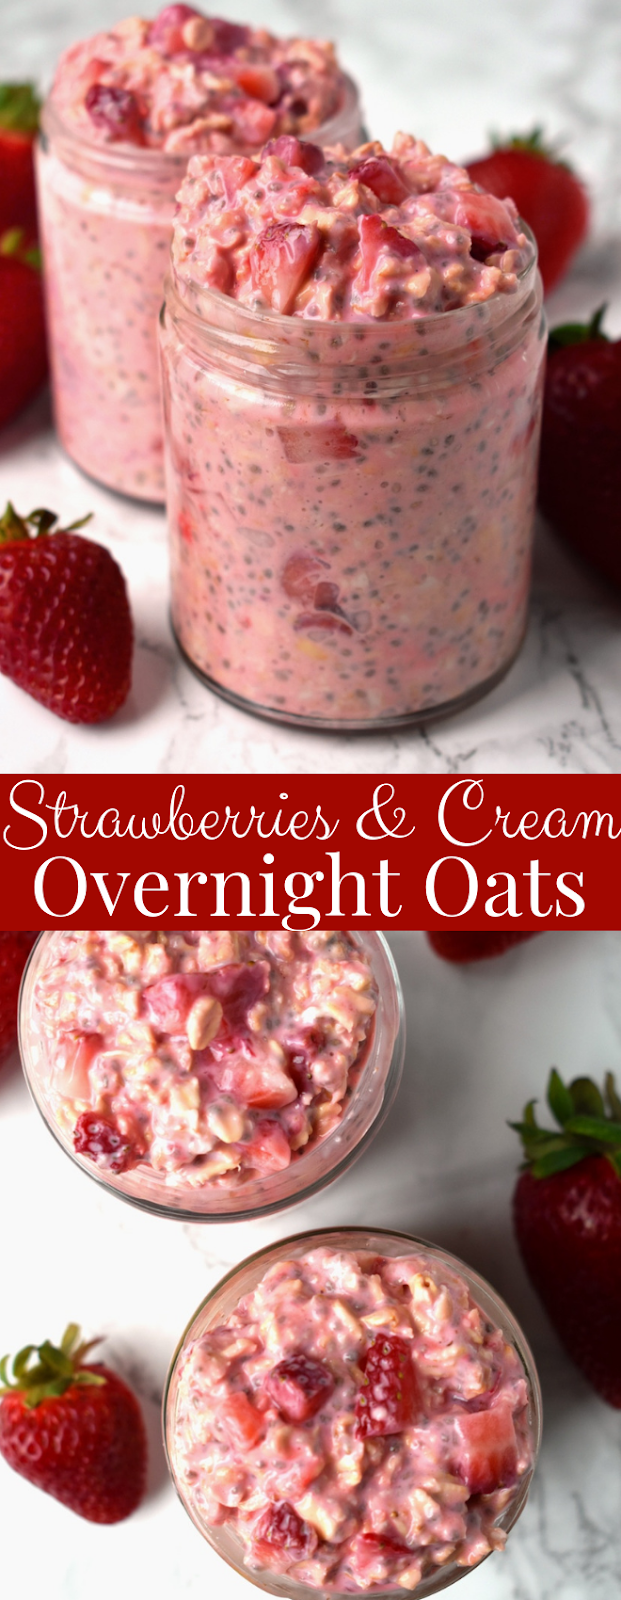 Strawberries and Cream Overnight Oats -   12 healthy recipes Vegan chia seeds ideas